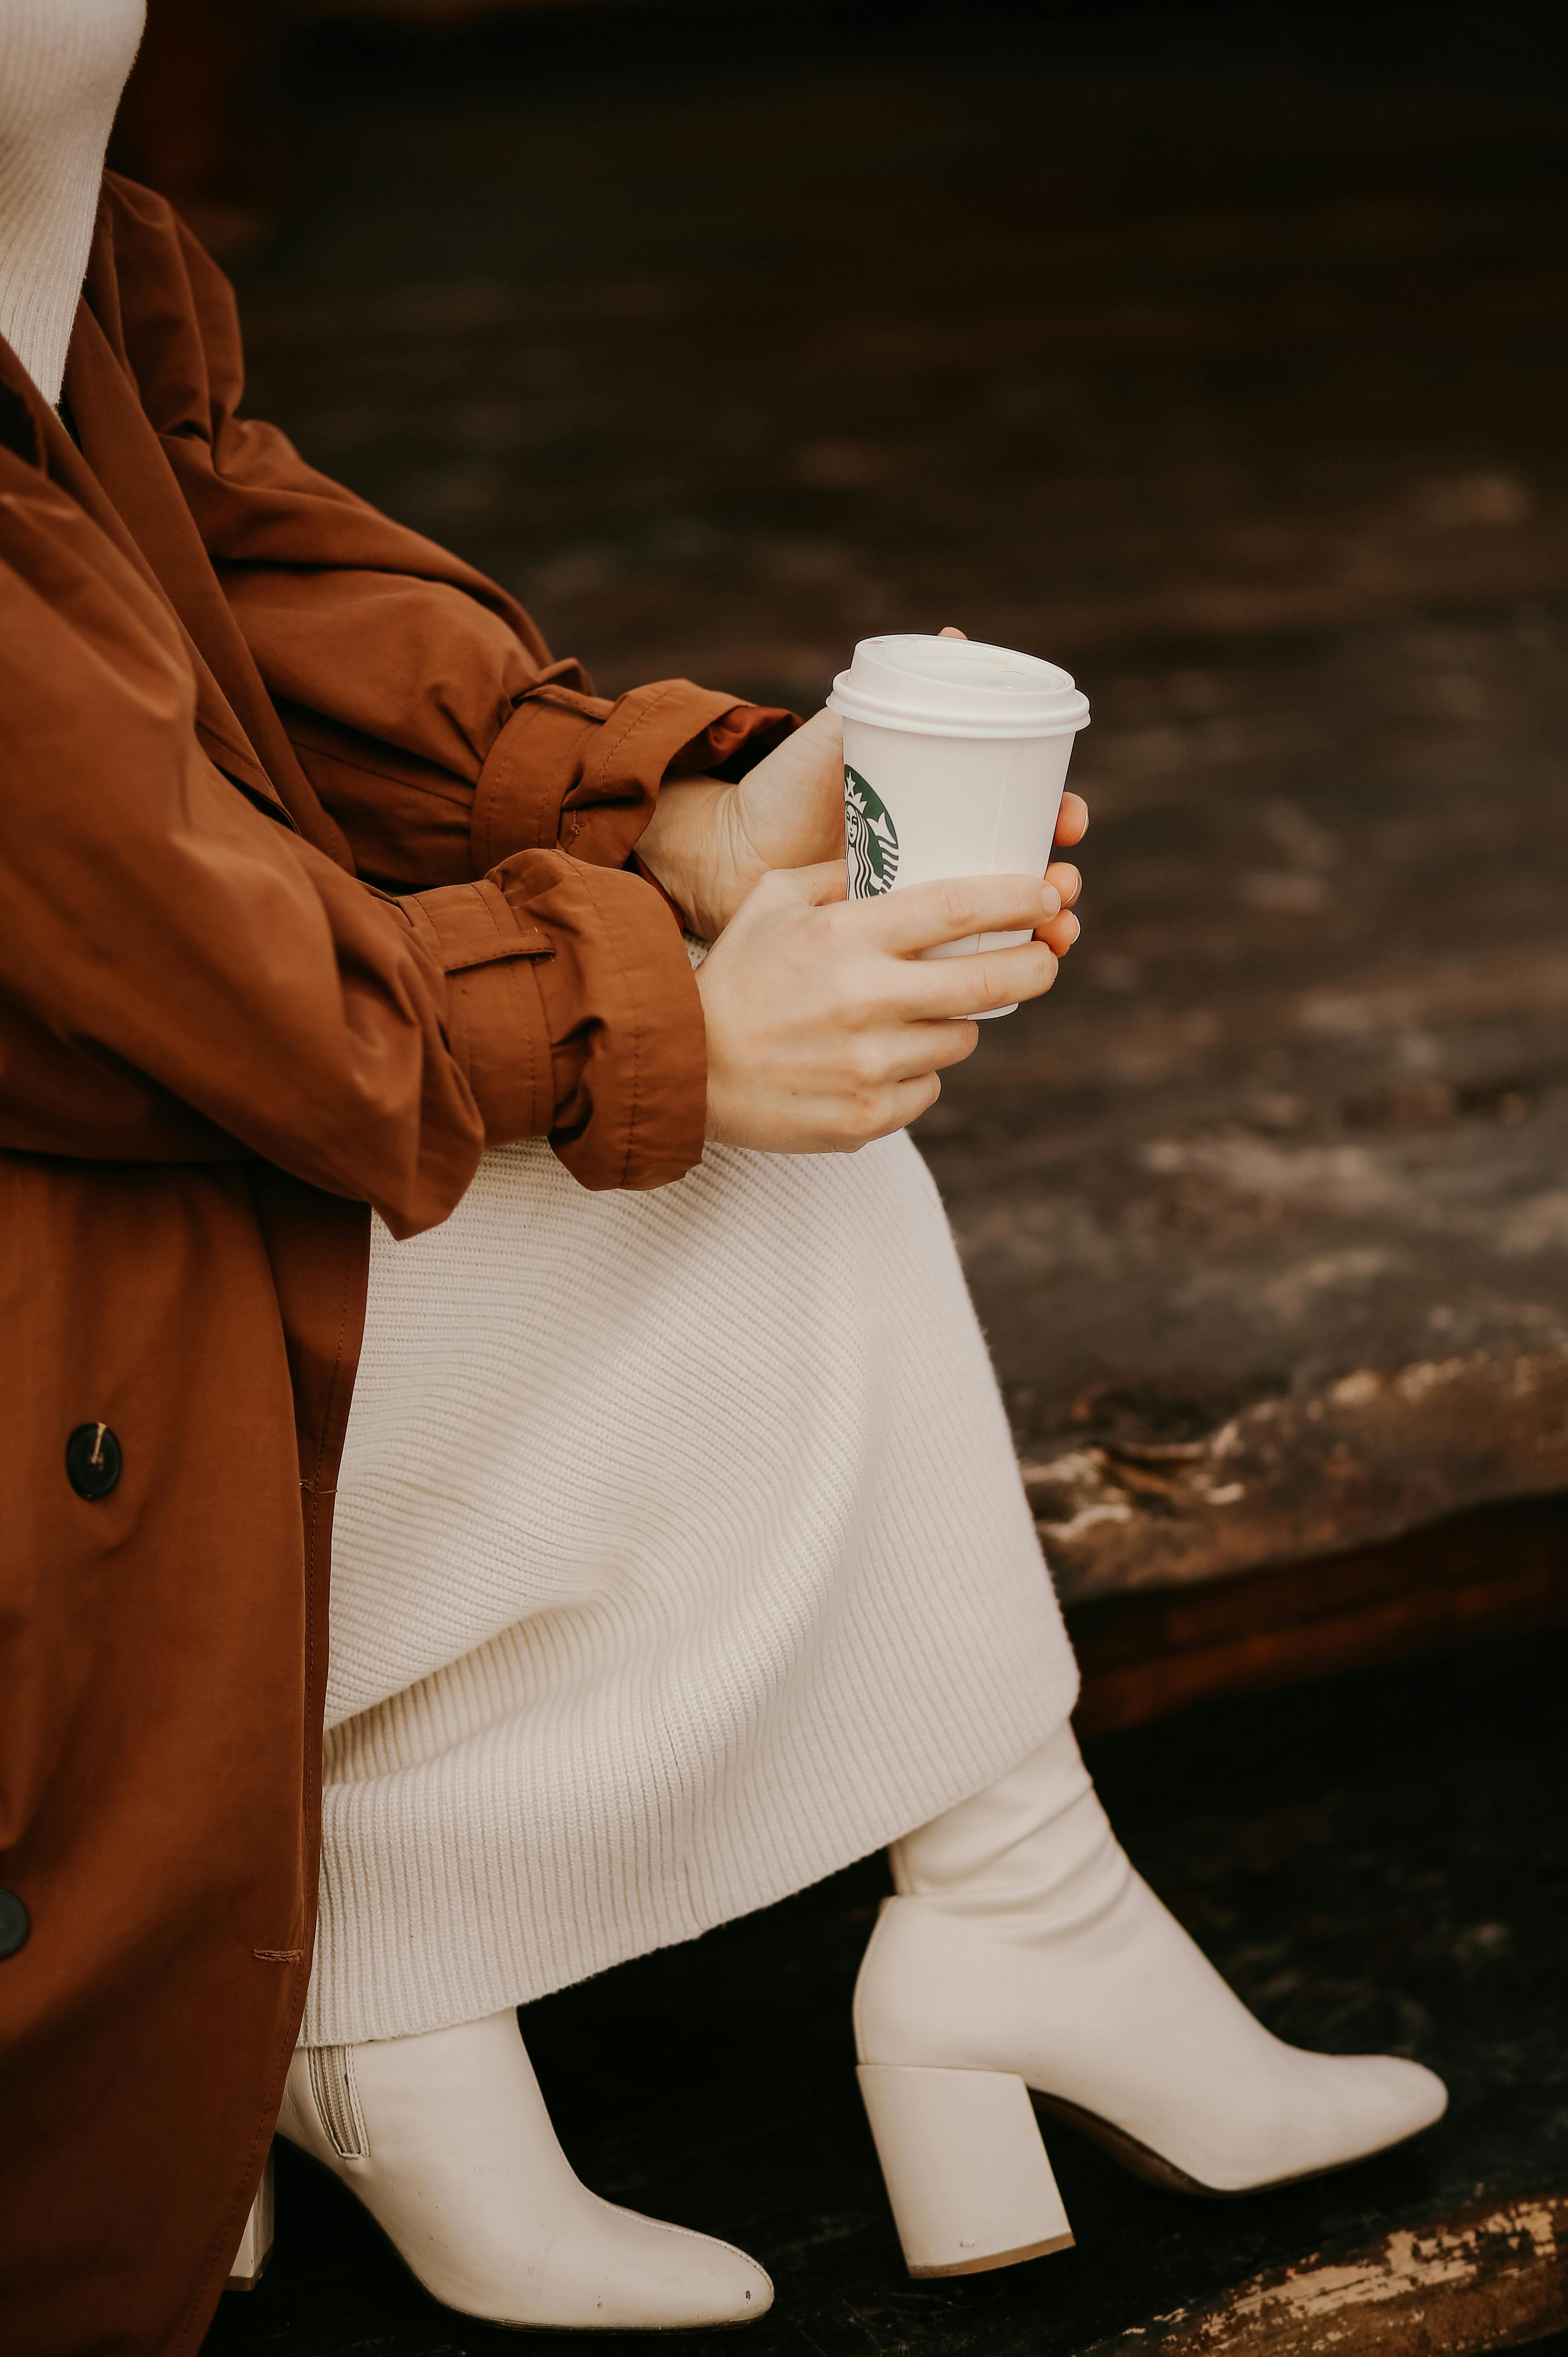 woman sitting and holding starbucks cup